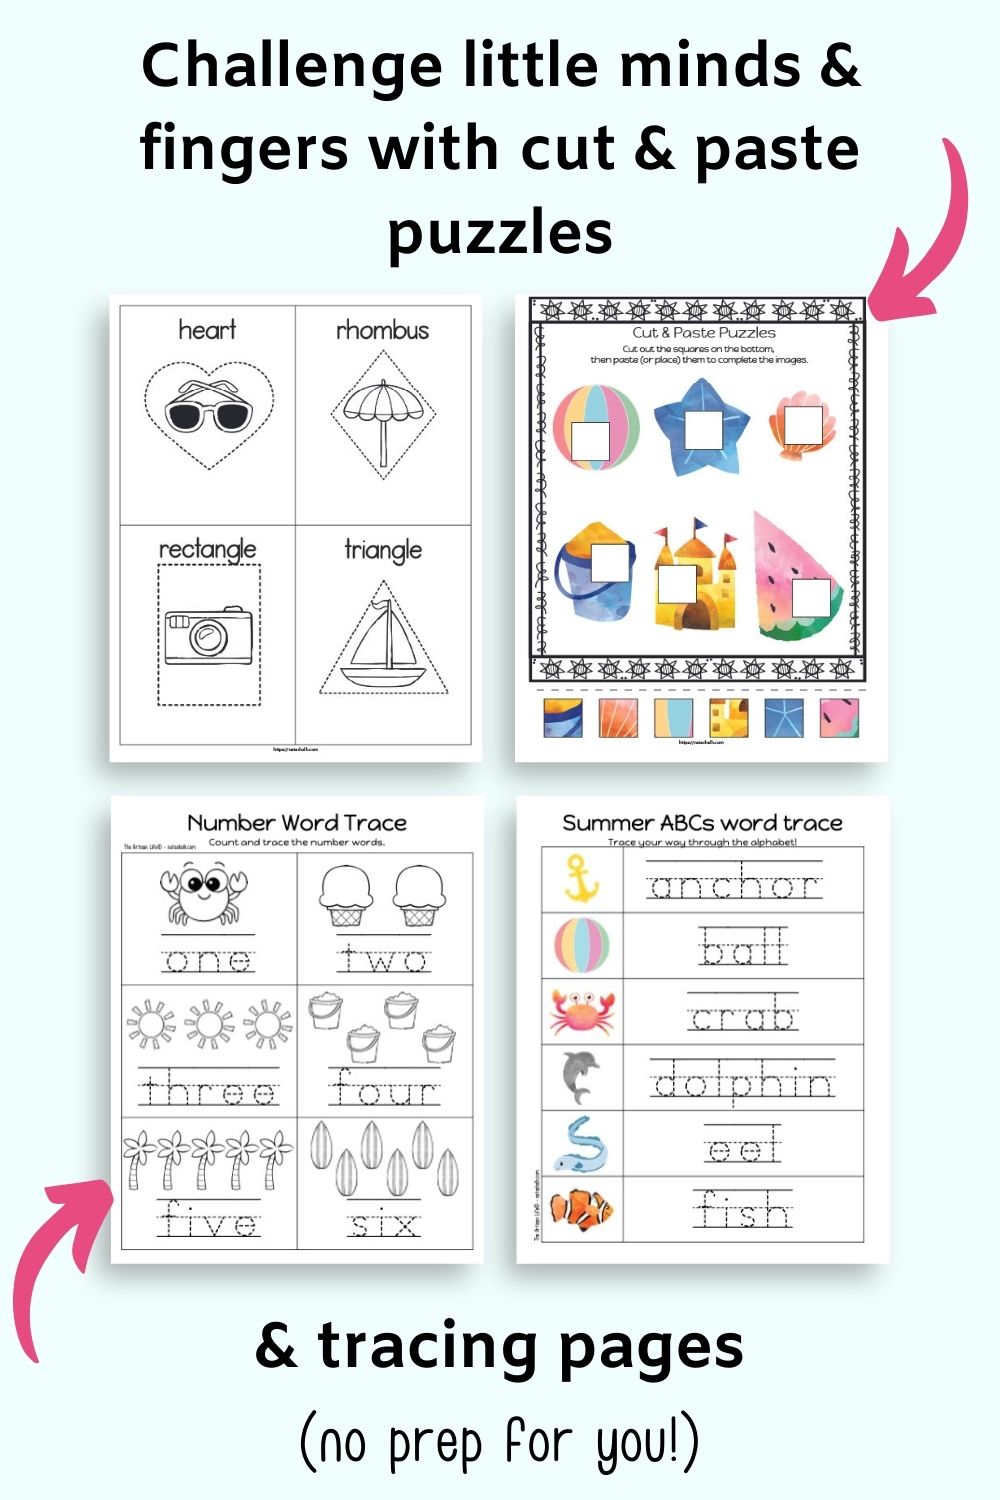 Text "challenge little minds and fingers with cut & paste puzzles and tracing pages (no prep for you!)" with a preview of a cut and paste puzzle page, tracing shapes, number word tracing, and summer abcs.